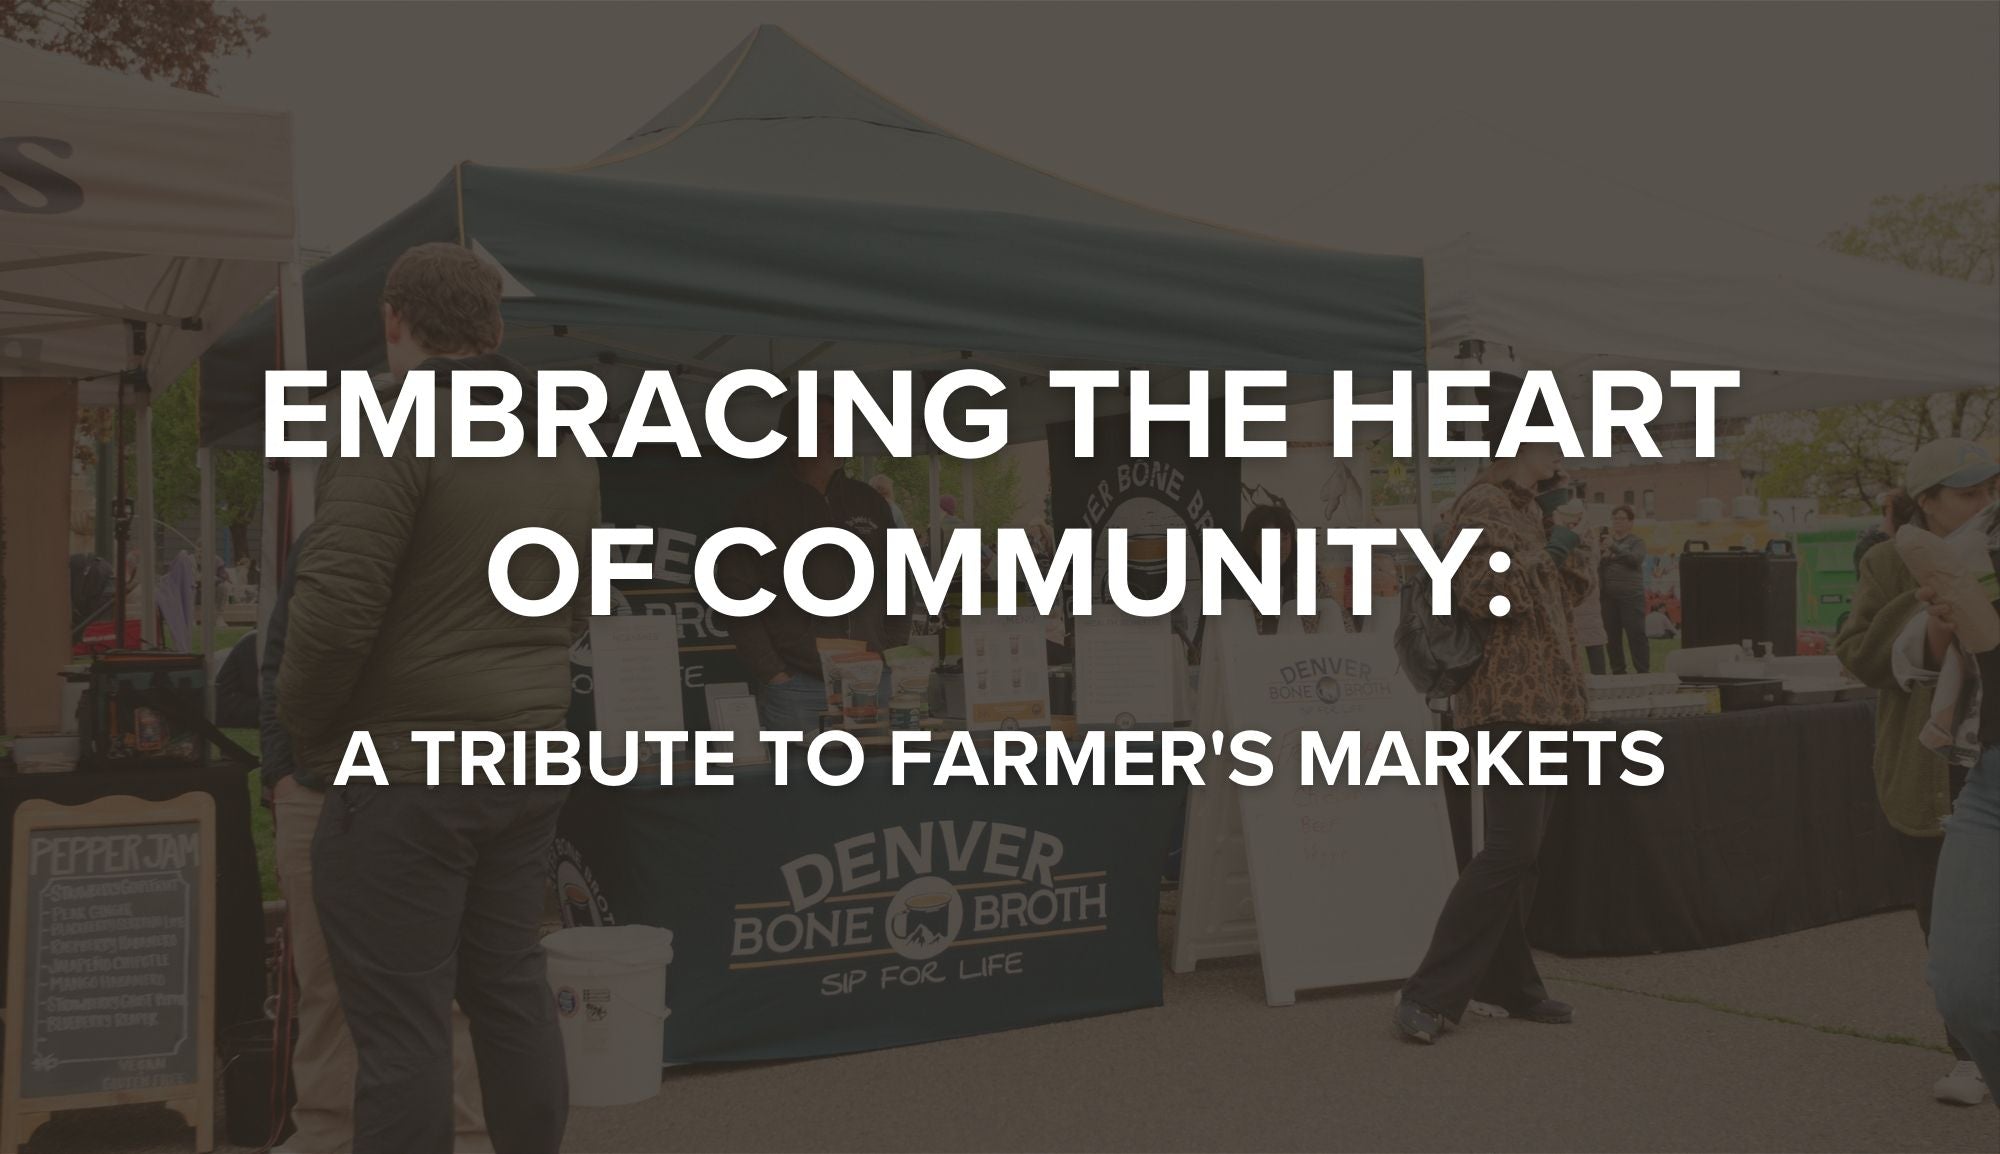 Embracing the Heart of Community: A Tribute to Farmer's Markets